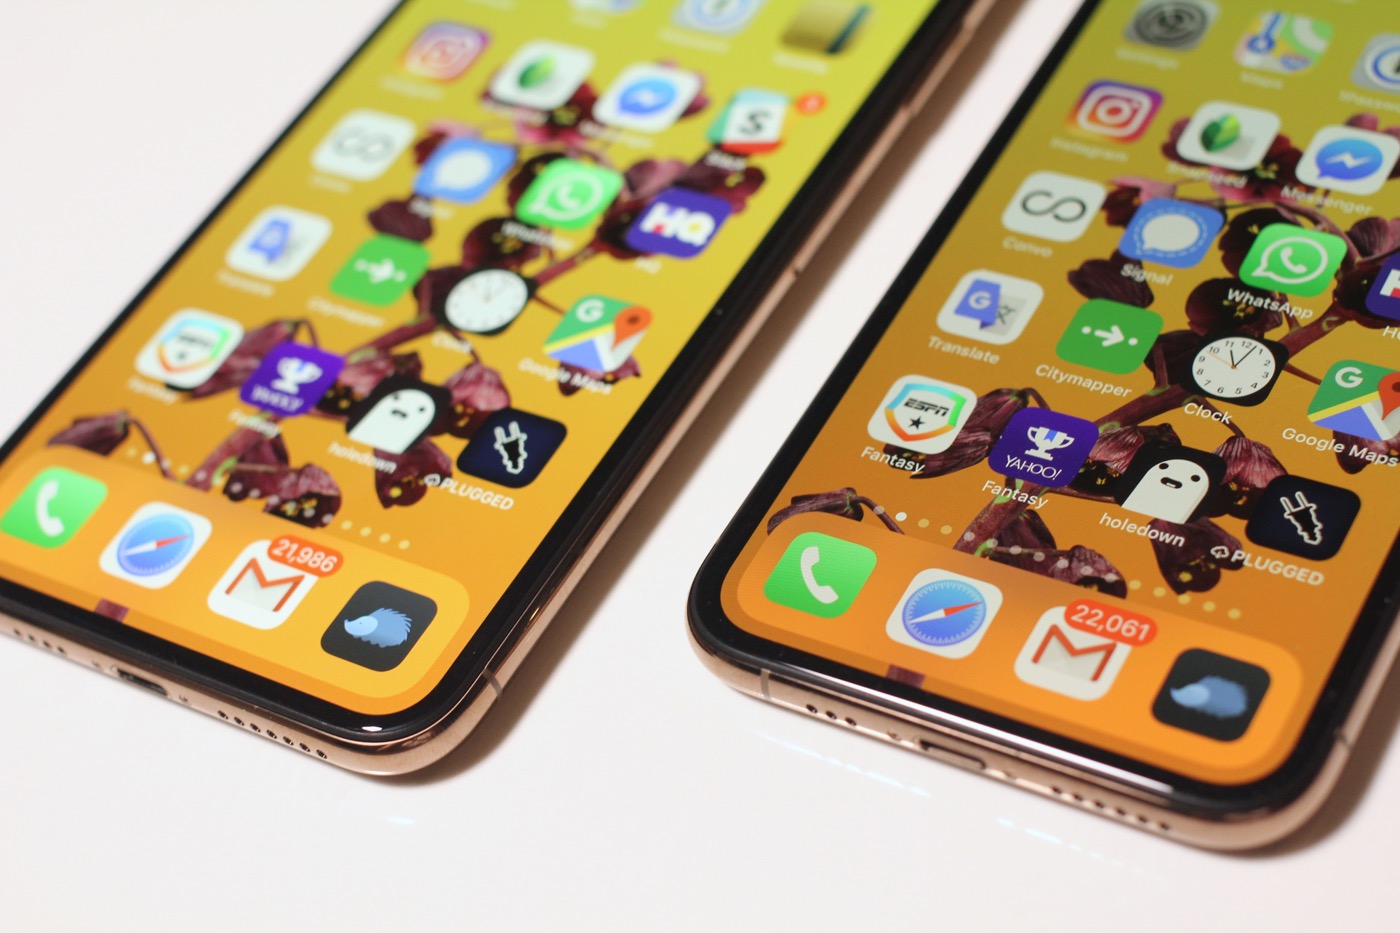 iphone xs max screen size